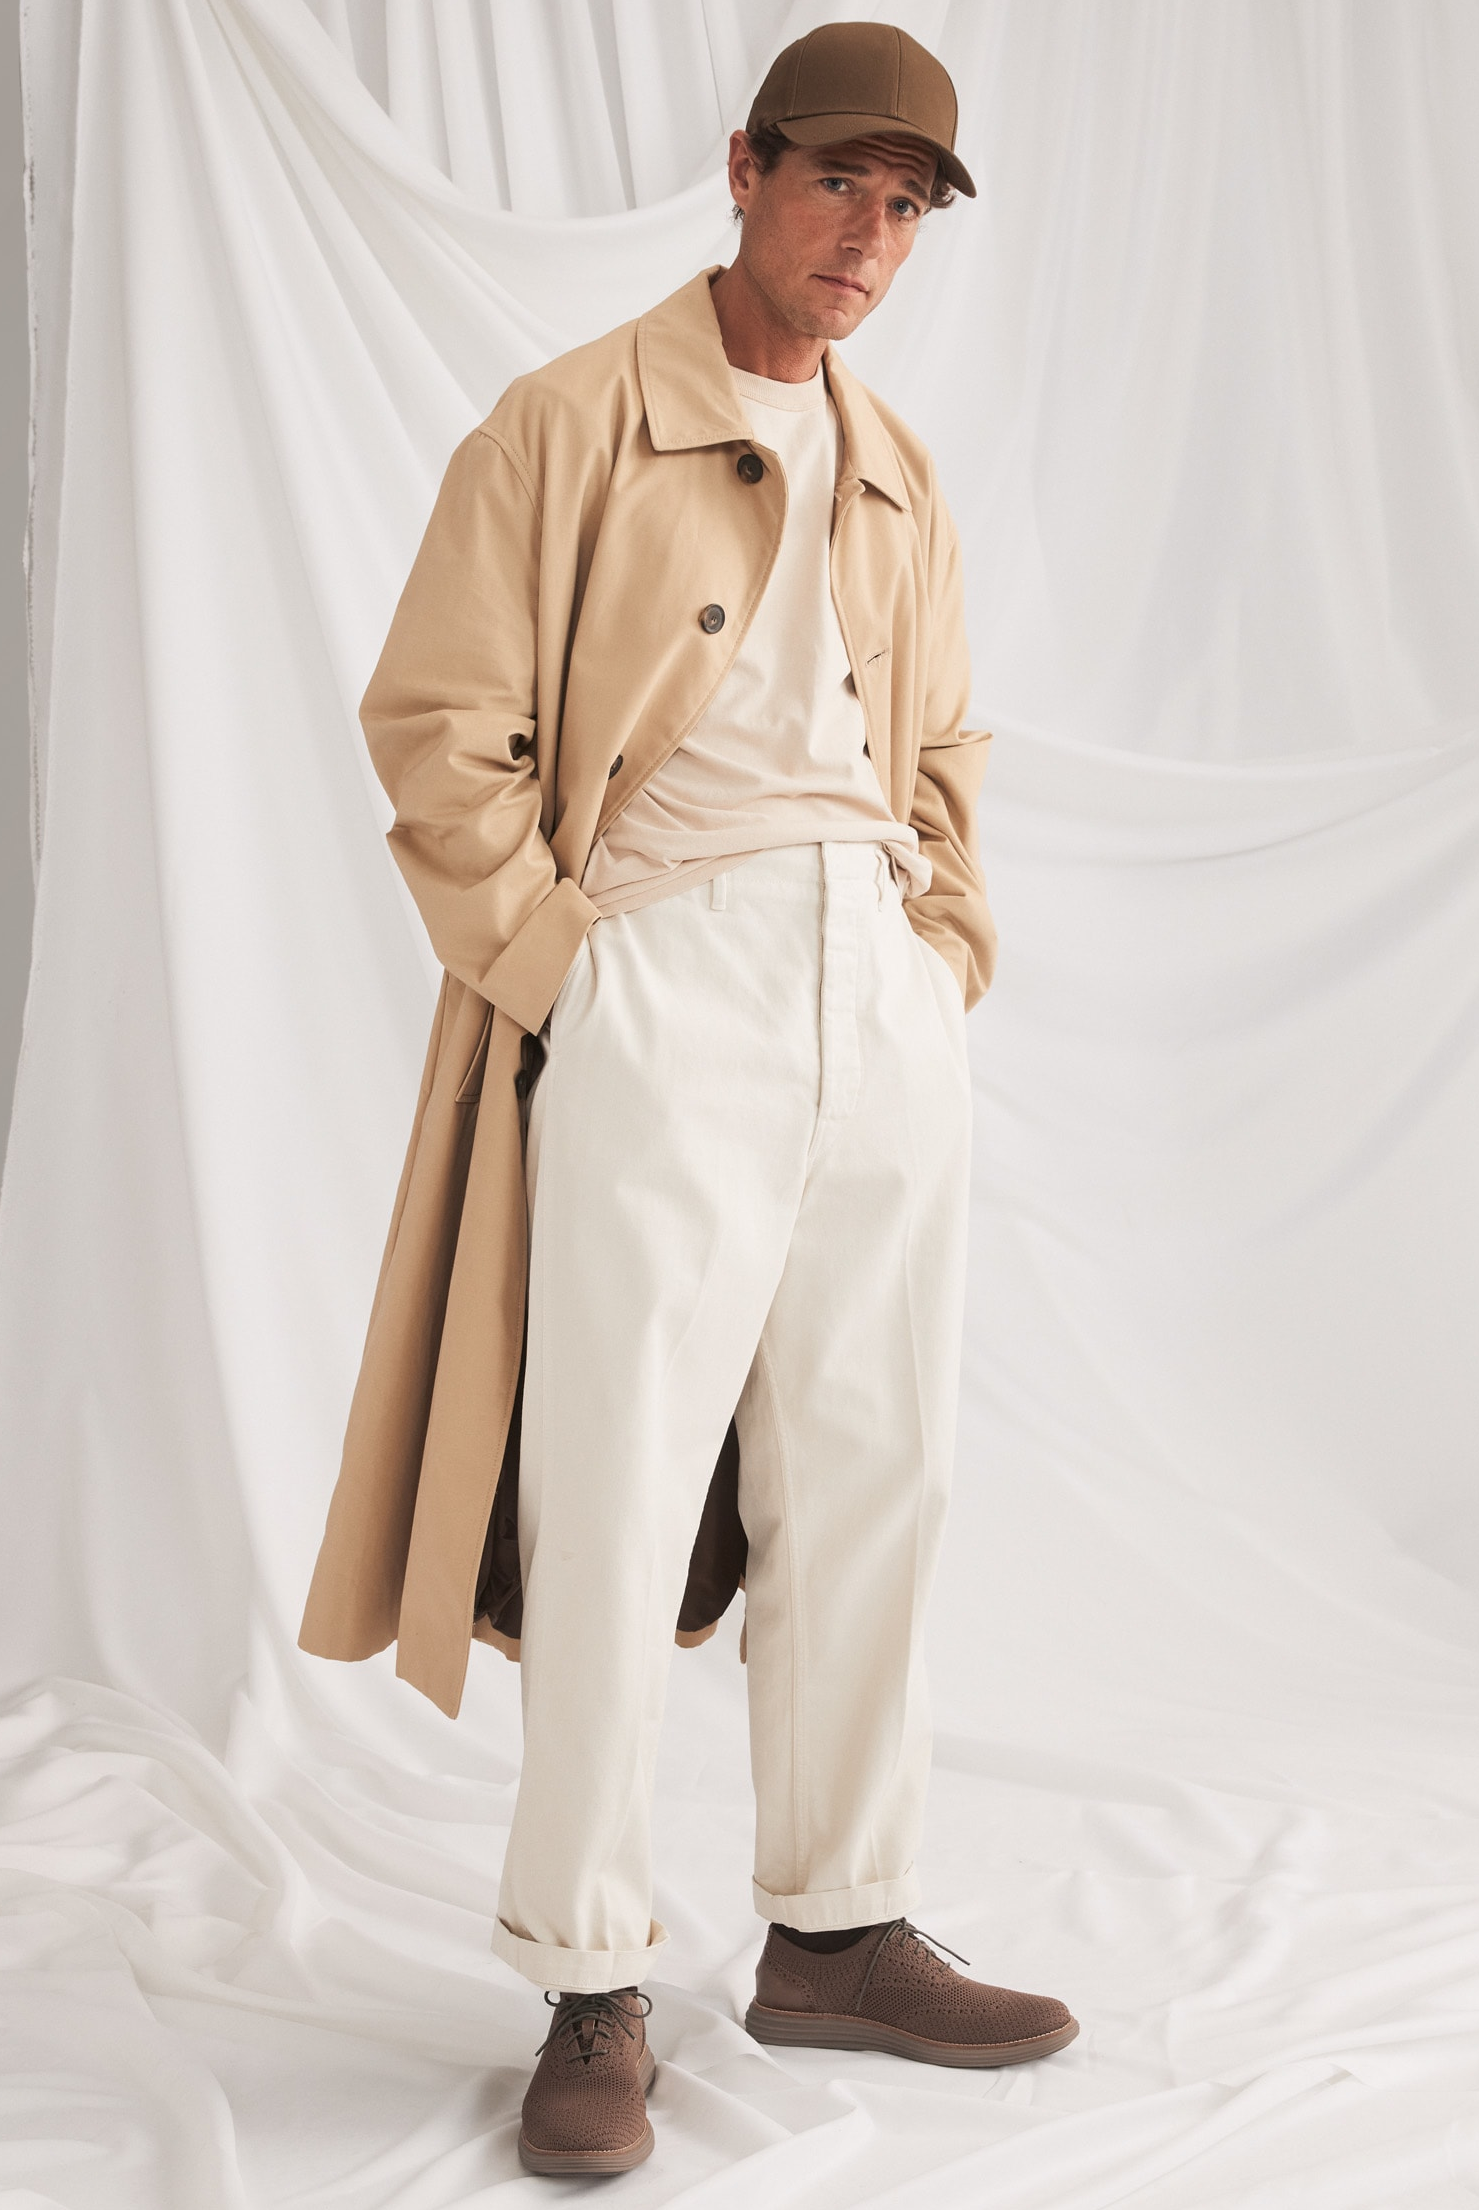 male model wearing oxfords and a long trench coat with a baseball cap